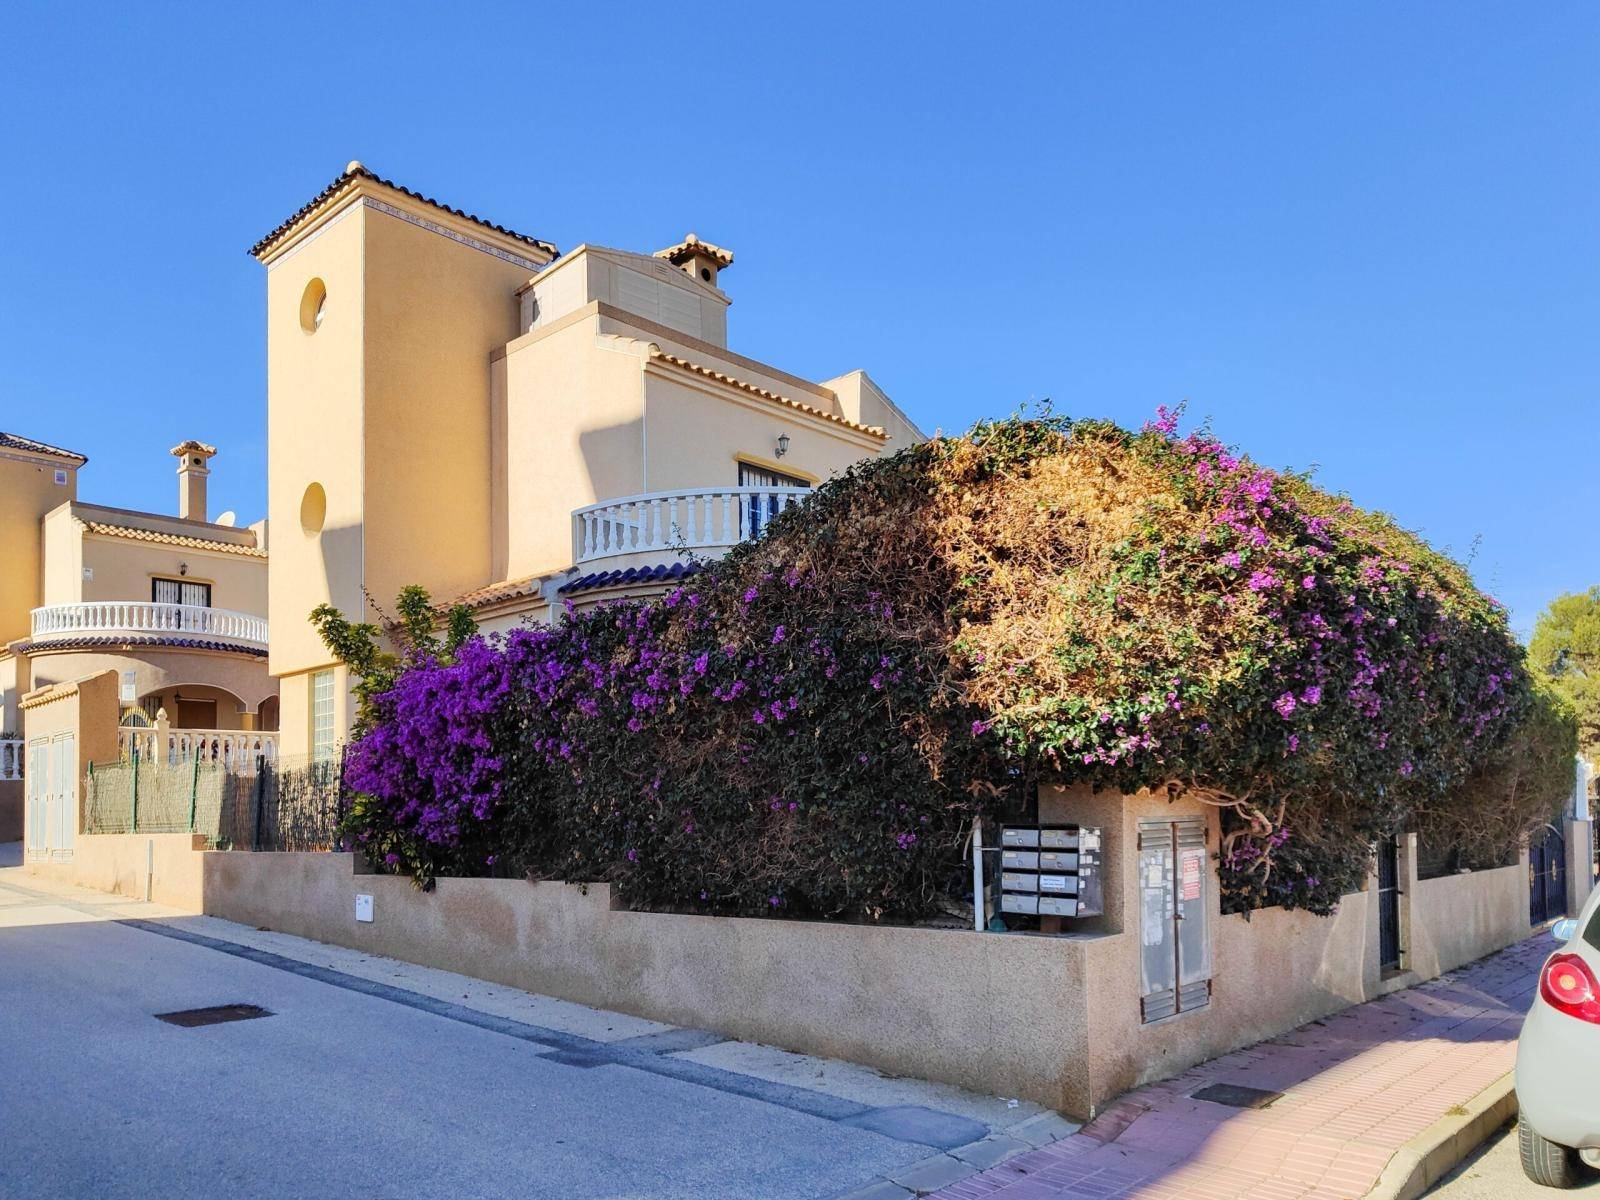 DETACHED VILLA WITH GARAGE AND POOL IN VILLAMARTIN